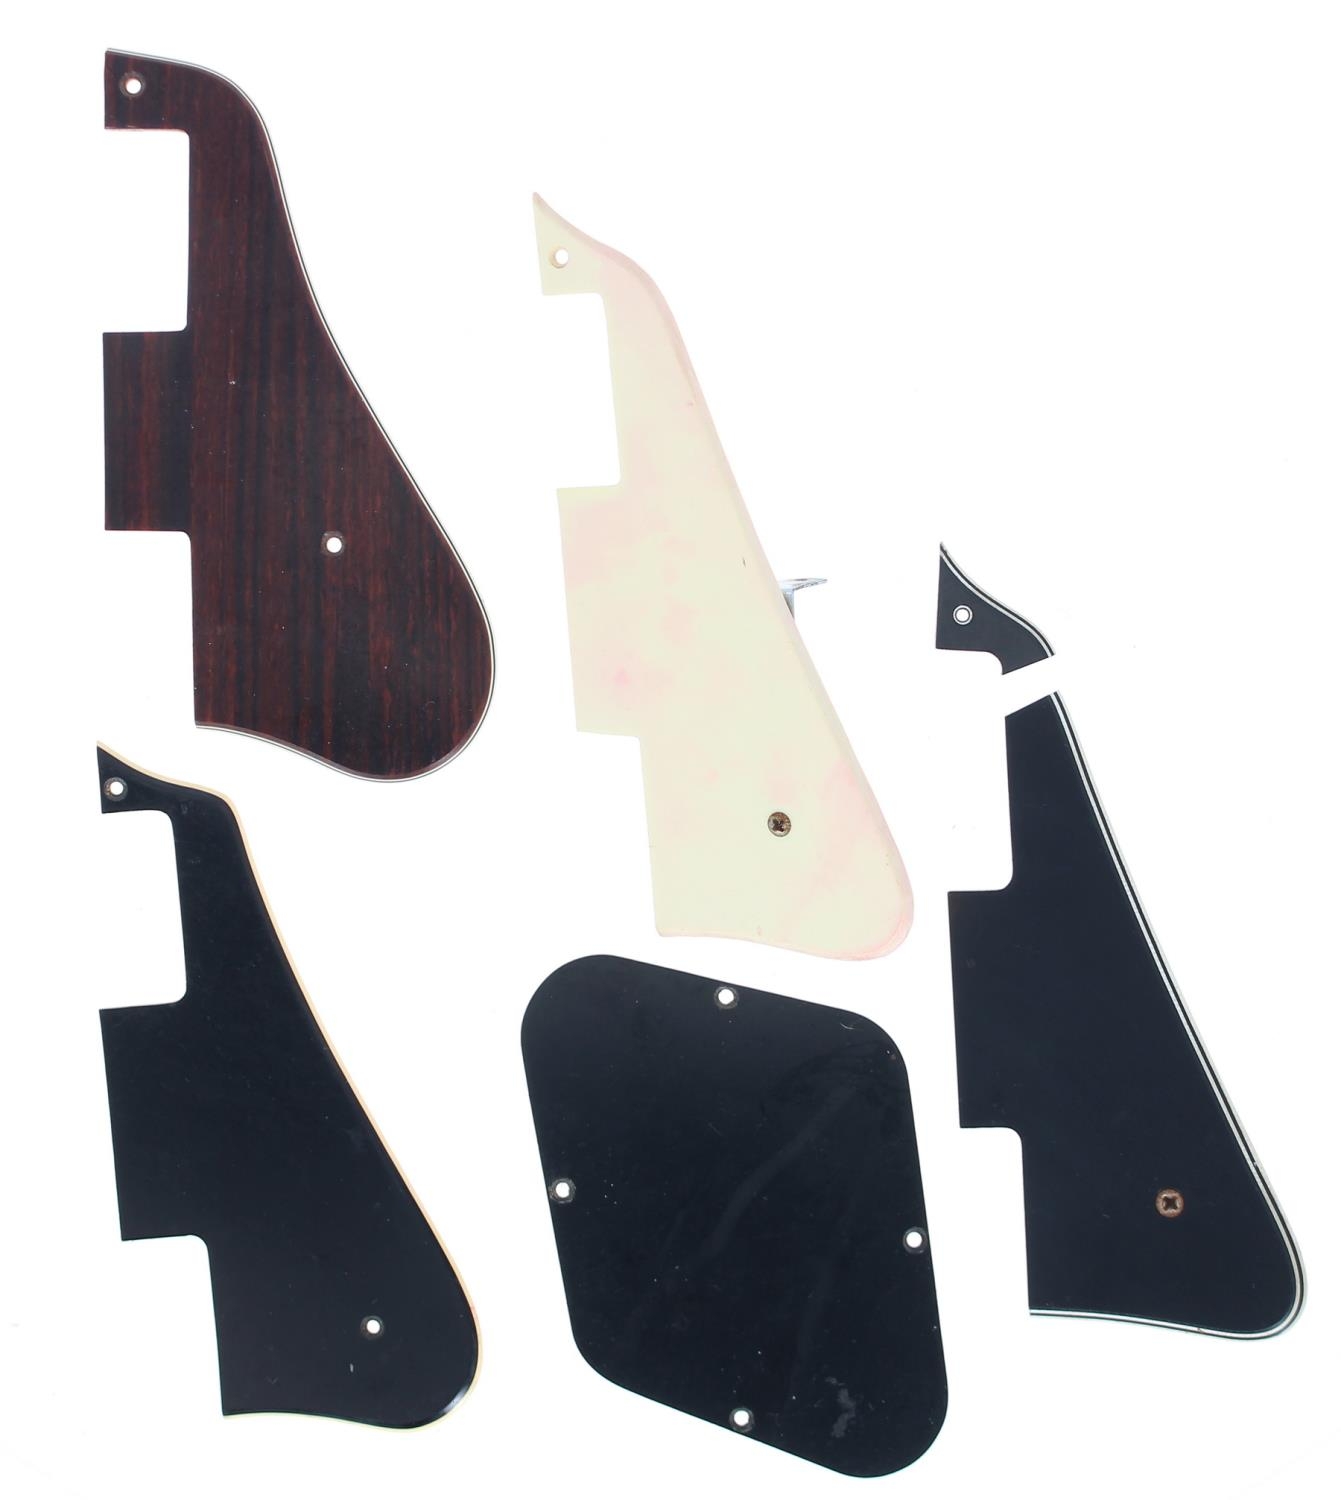 Damaged 1950s/60s Gibson Les Paul Custom guitar pickguard; together with another old Gibson